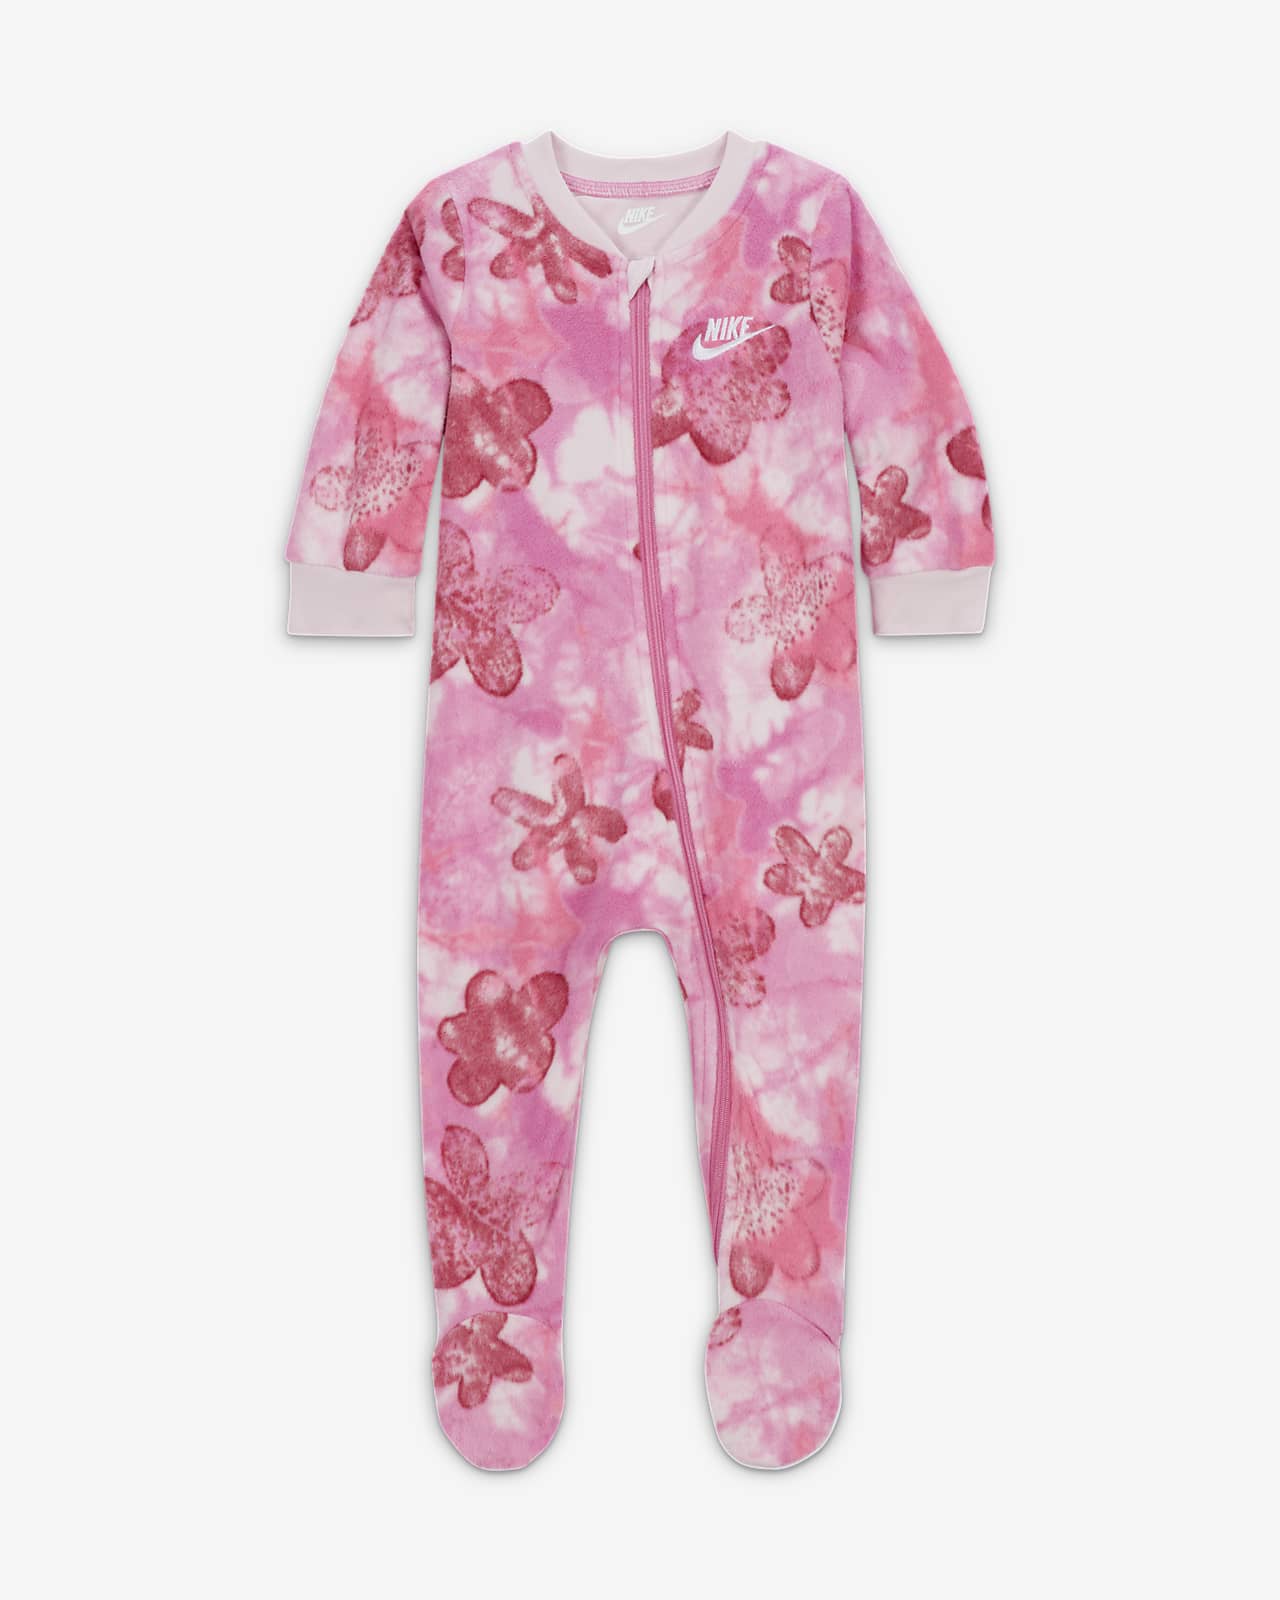 Nike Sci-Dye Club Coverall Baby Coverall. | Strampler